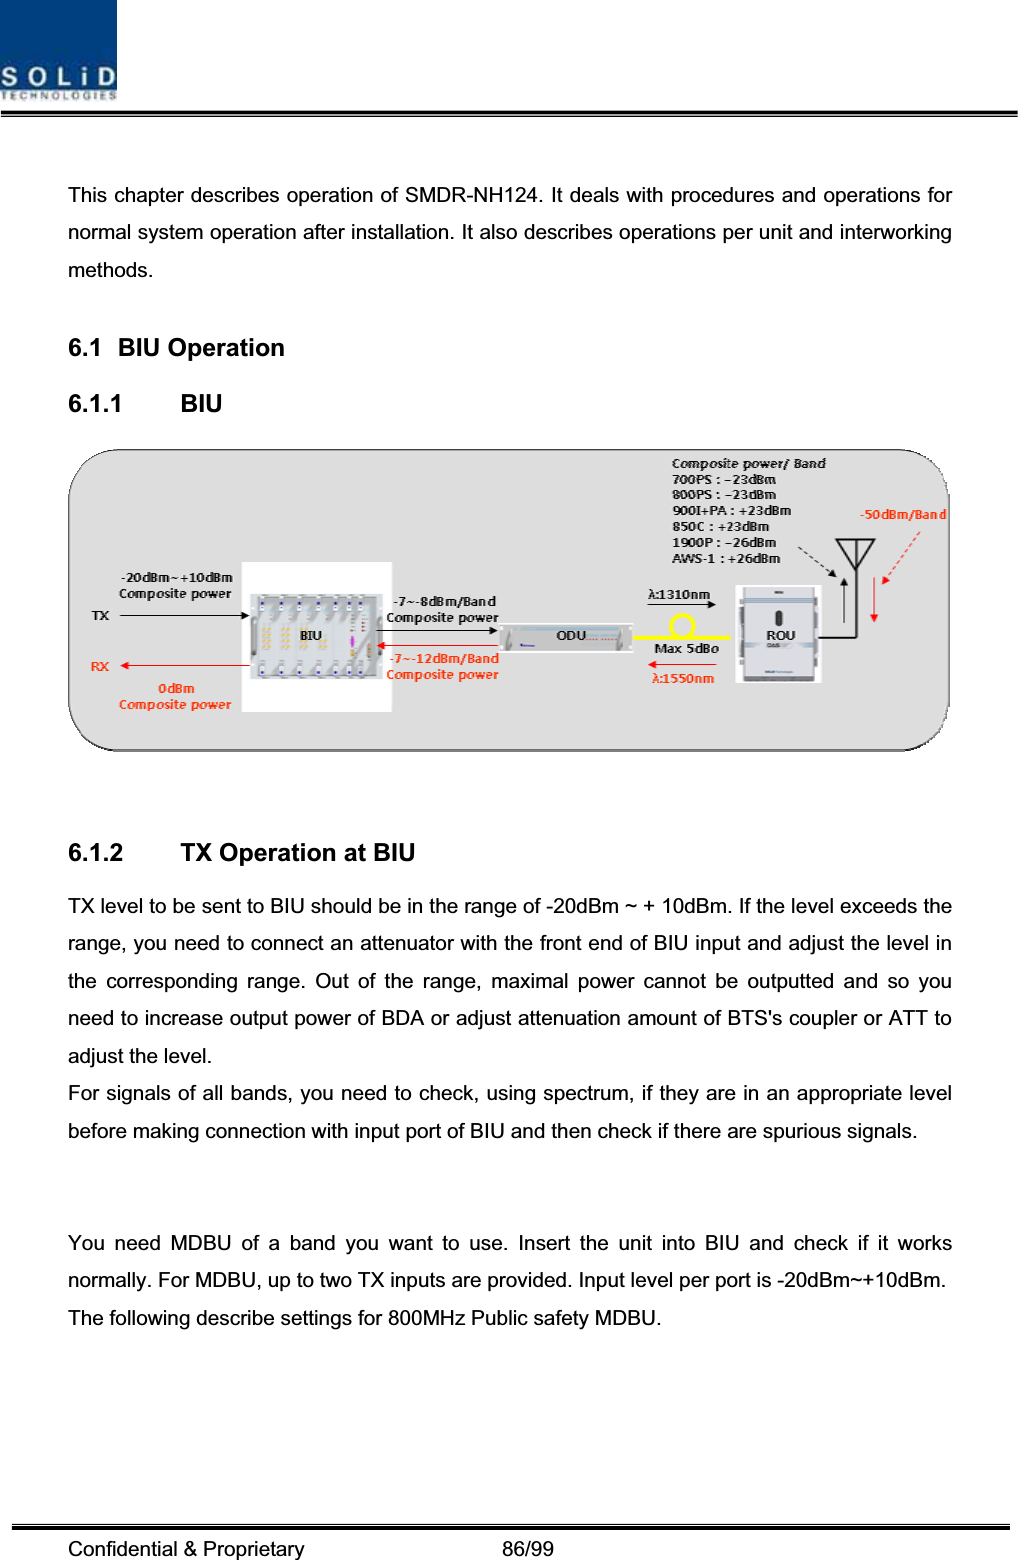 Confidential &amp; Proprietary                   86/99 This chapter describes operation of SMDR-NH124. It deals with procedures and operations for normal system operation after installation. It also describes operations per unit and interworking methods. 6.1   BIU  Operation 6.1.1 BIU  6.1.2  TX Operation at BIU TX level to be sent to BIU should be in the range of -20dBm ~ + 10dBm. If the level exceeds the range, you need to connect an attenuator with the front end of BIU input and adjust the level in the corresponding range. Out of the range, maximal power cannot be outputted and so you need to increase output power of BDA or adjust attenuation amount of BTS&apos;s coupler or ATT to adjust the level. For signals of all bands, you need to check, using spectrum, if they are in an appropriate level before making connection with input port of BIU and then check if there are spurious signals. You need MDBU of a band you want to use. Insert the unit into BIU and check if it works normally. For MDBU, up to two TX inputs are provided. Input level per port is -20dBm~+10dBm. The following describe settings for 800MHz Public safety MDBU. 